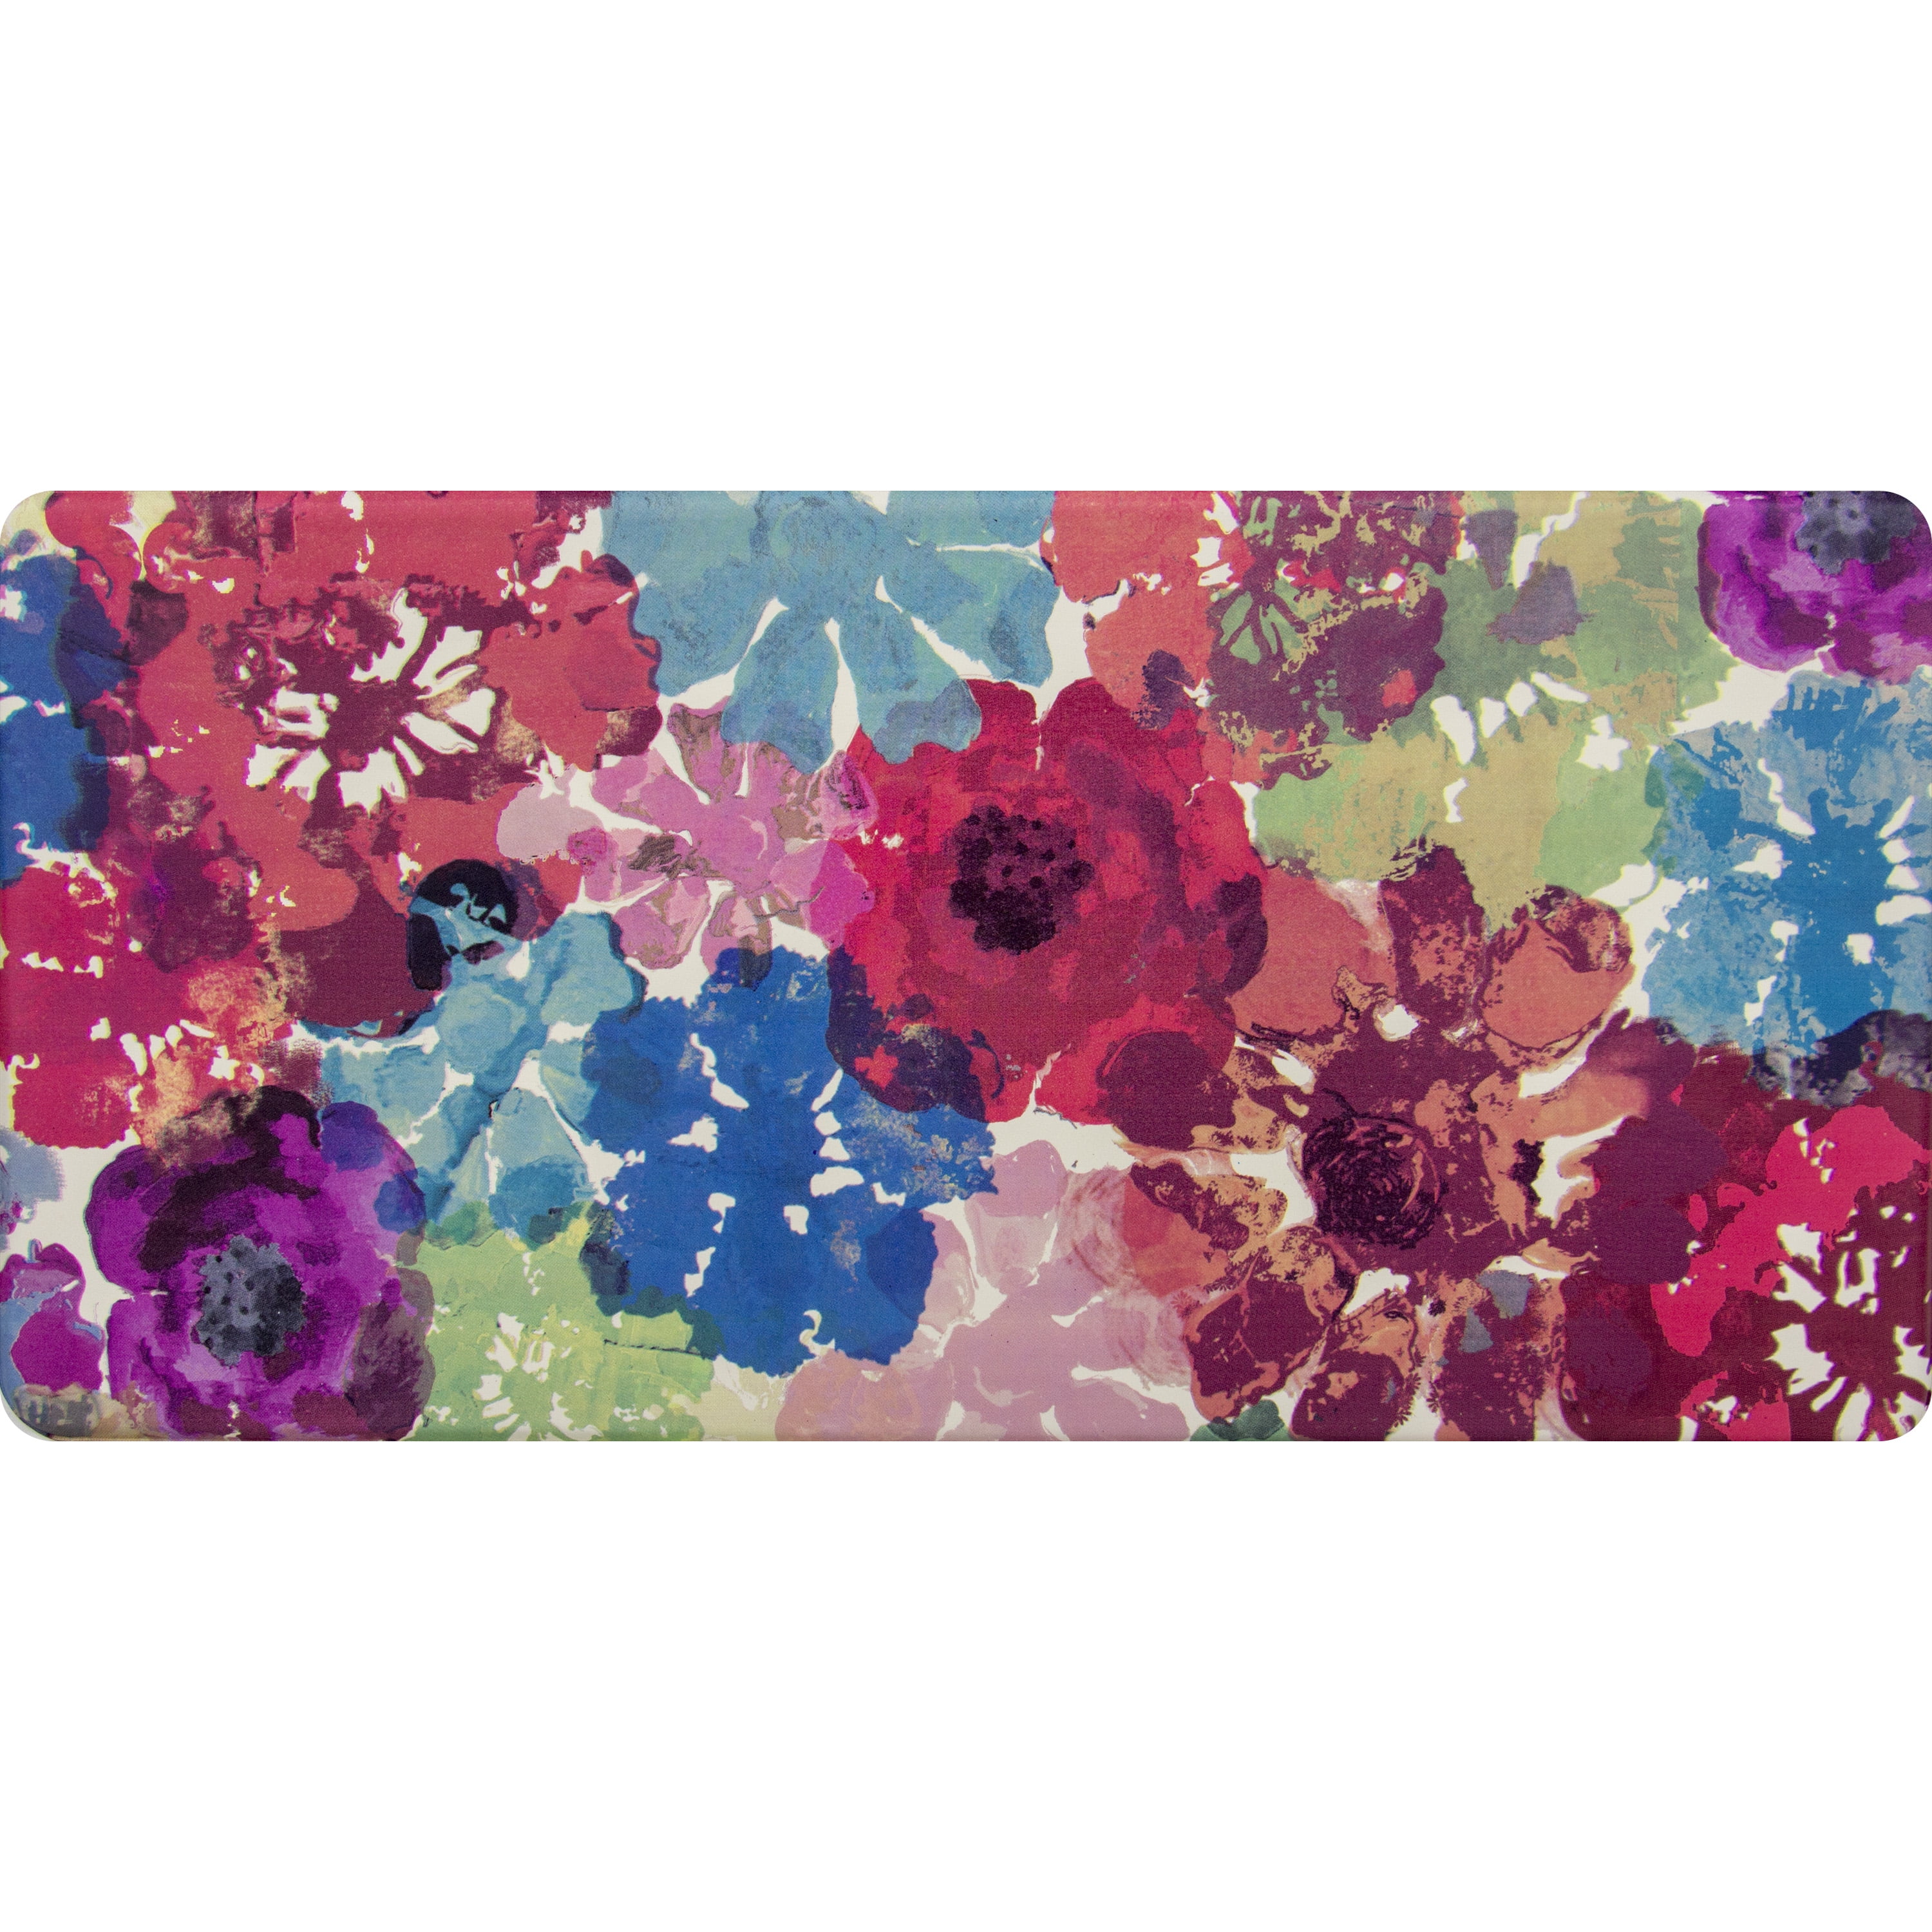 1.7' x 3.3' ALAZA Watercolor Floral Flower Blossom Non Slip Kitchen Floor Mat Kitchen Rug for Entryway Hallway Bathroom Living Room Bedroom 39 x 20 inches 